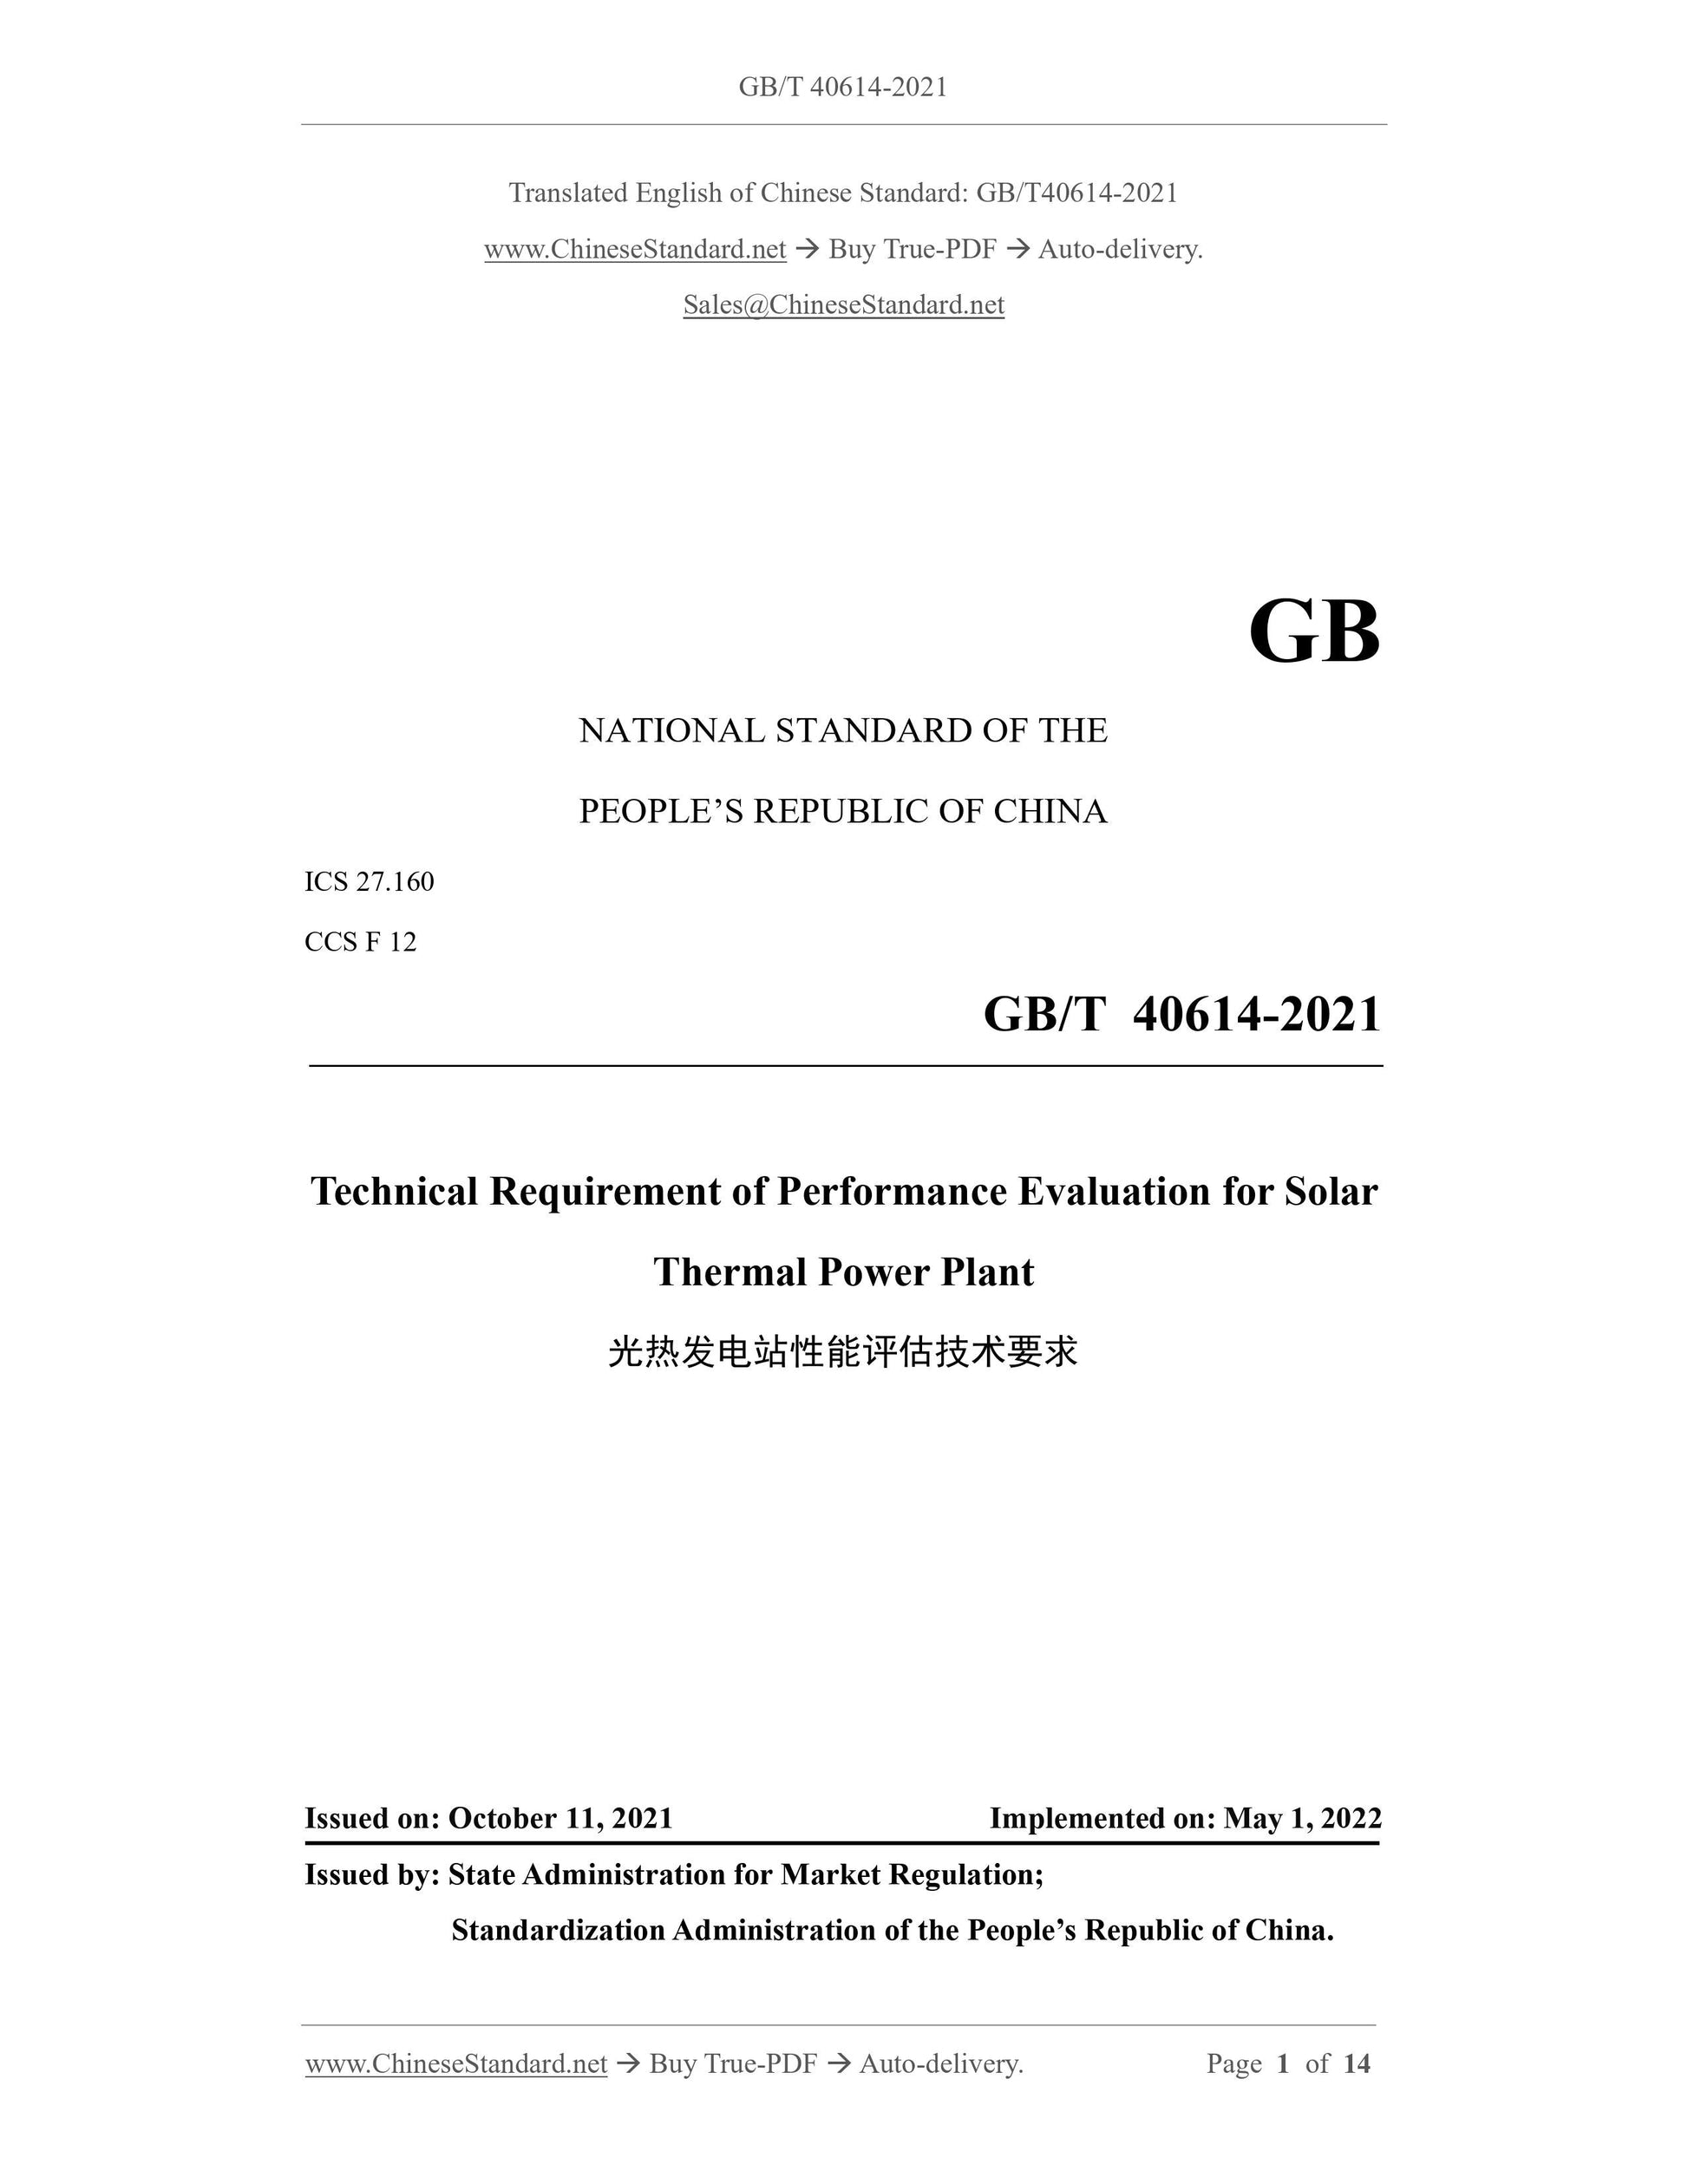 GB/T 40614-2021 Page 1